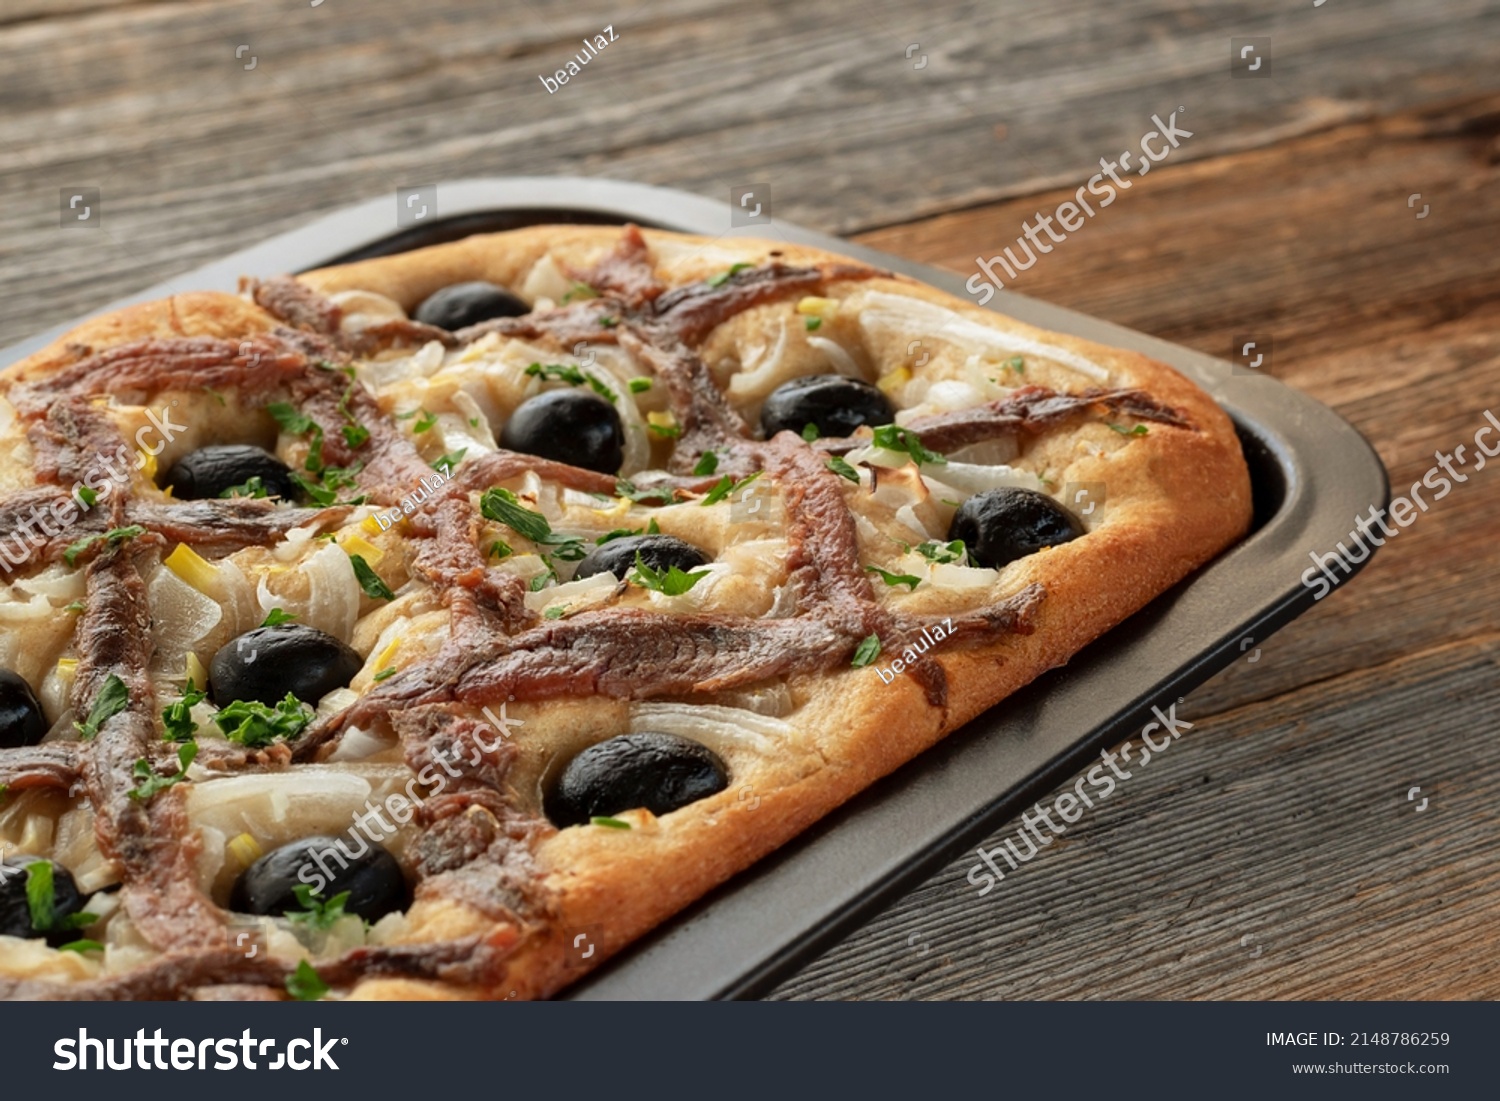 Pissaladière is the famous French onion pie. This onion "pizza" with anchovies and olives comes from Nice and can be made with bread or cooked dough. #2148786259